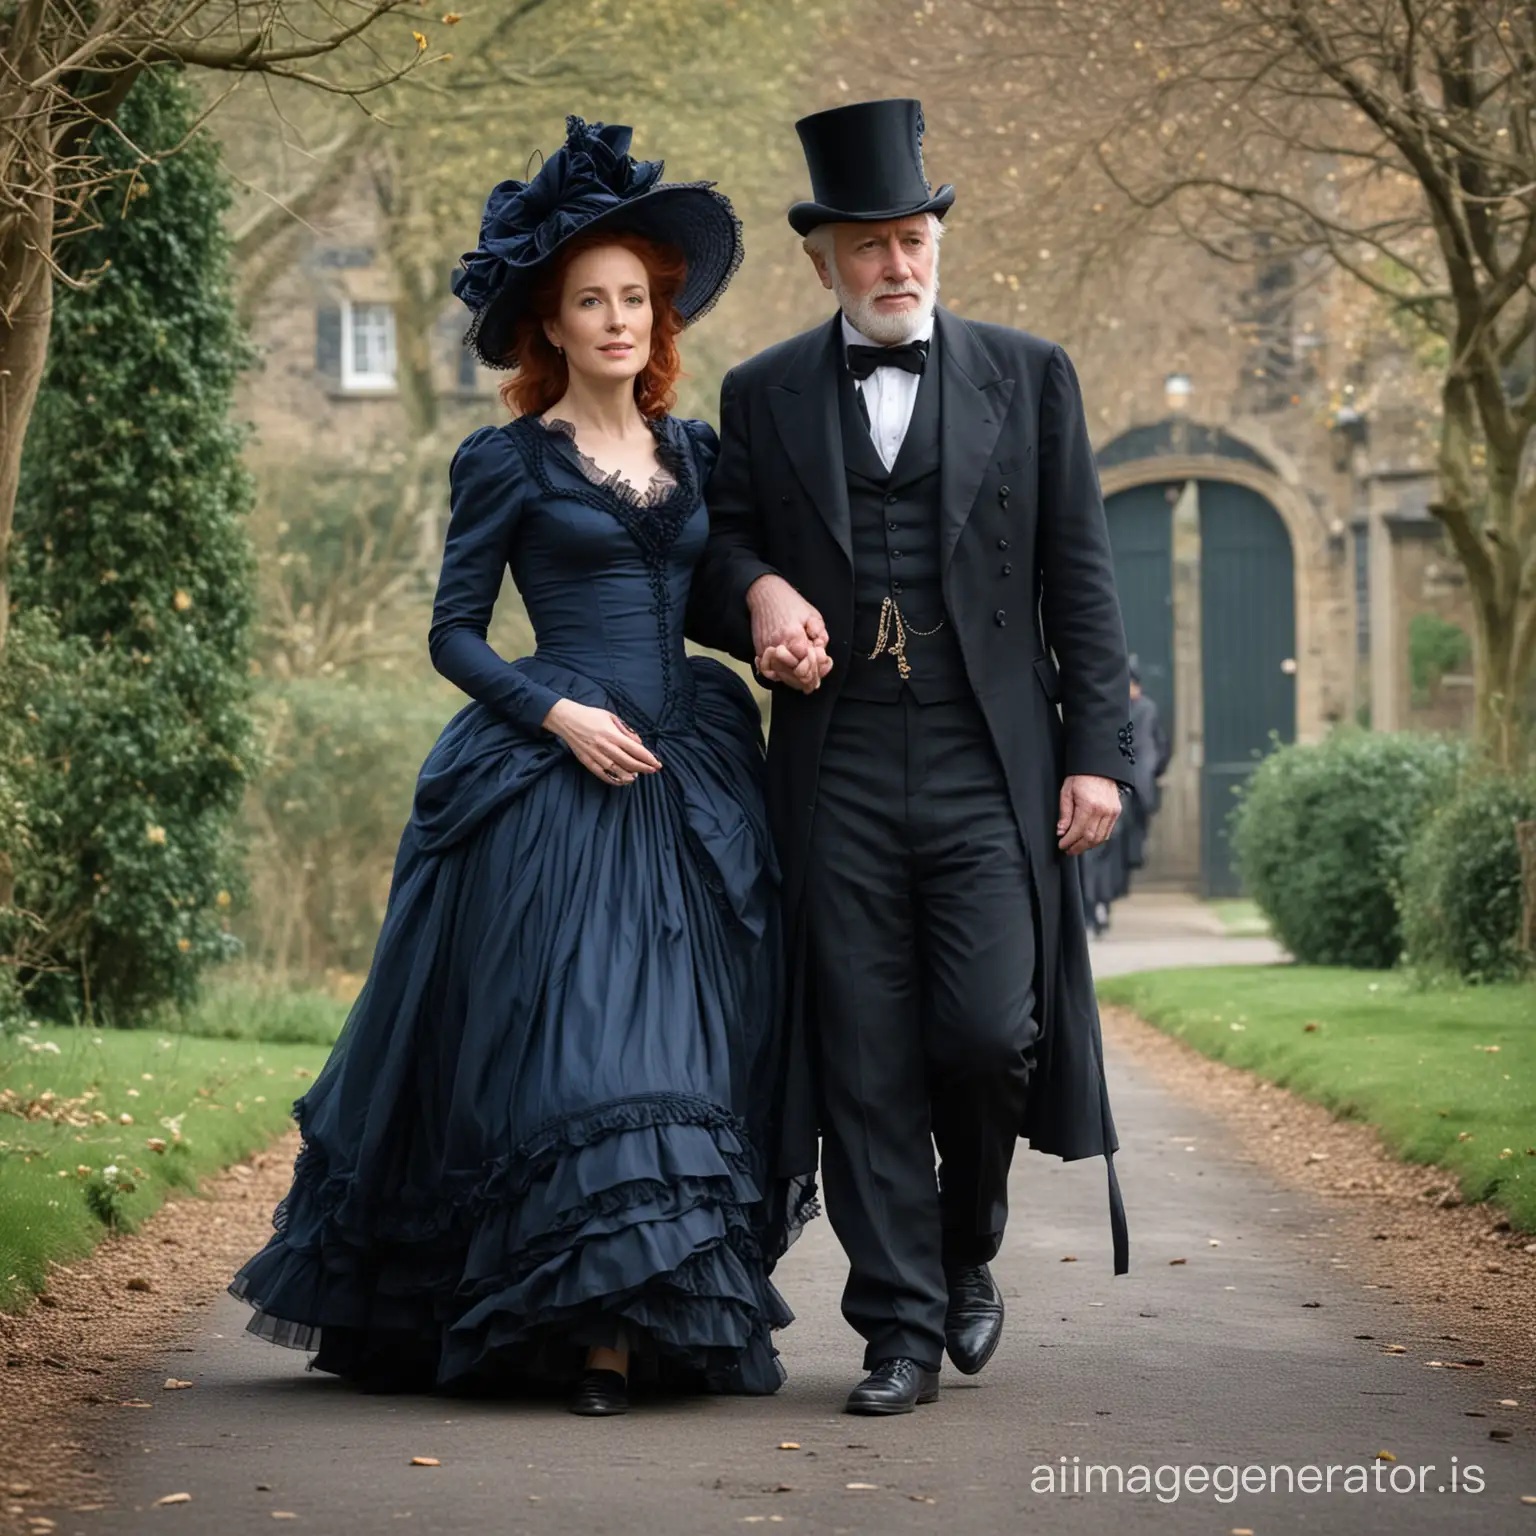 red hair Gillian Anderson wearing a dark blue floor-length loose billowing 1860 Victorian crinoline poofy dress with a frilly bonnet walking with an old man dressed in a black Victorian suit who seems to be her newlywed husband